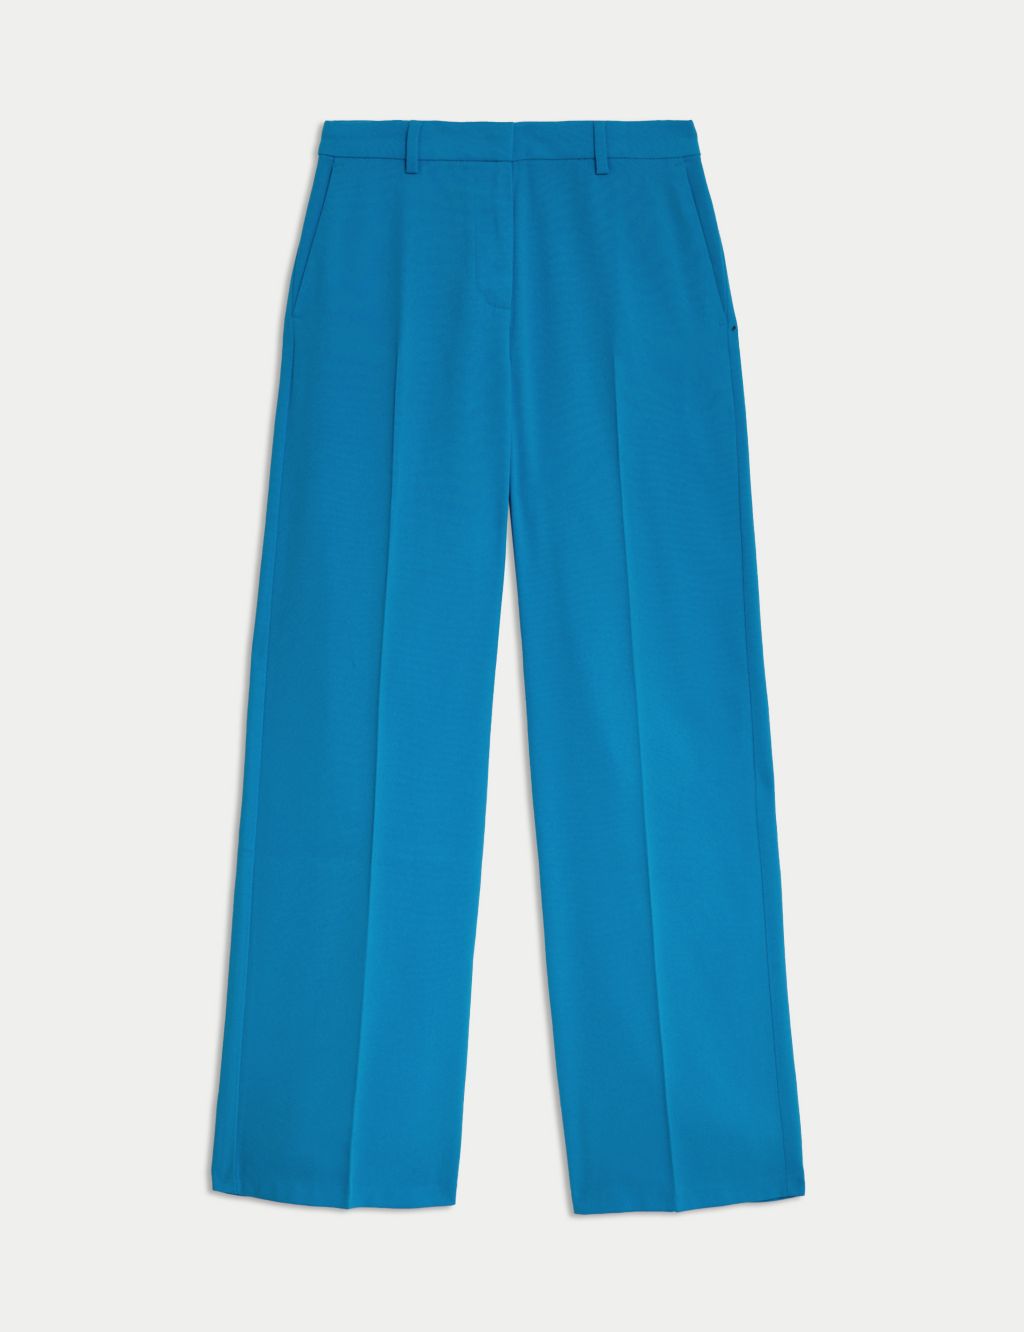 Crepe Tailored Straight Leg Trousers